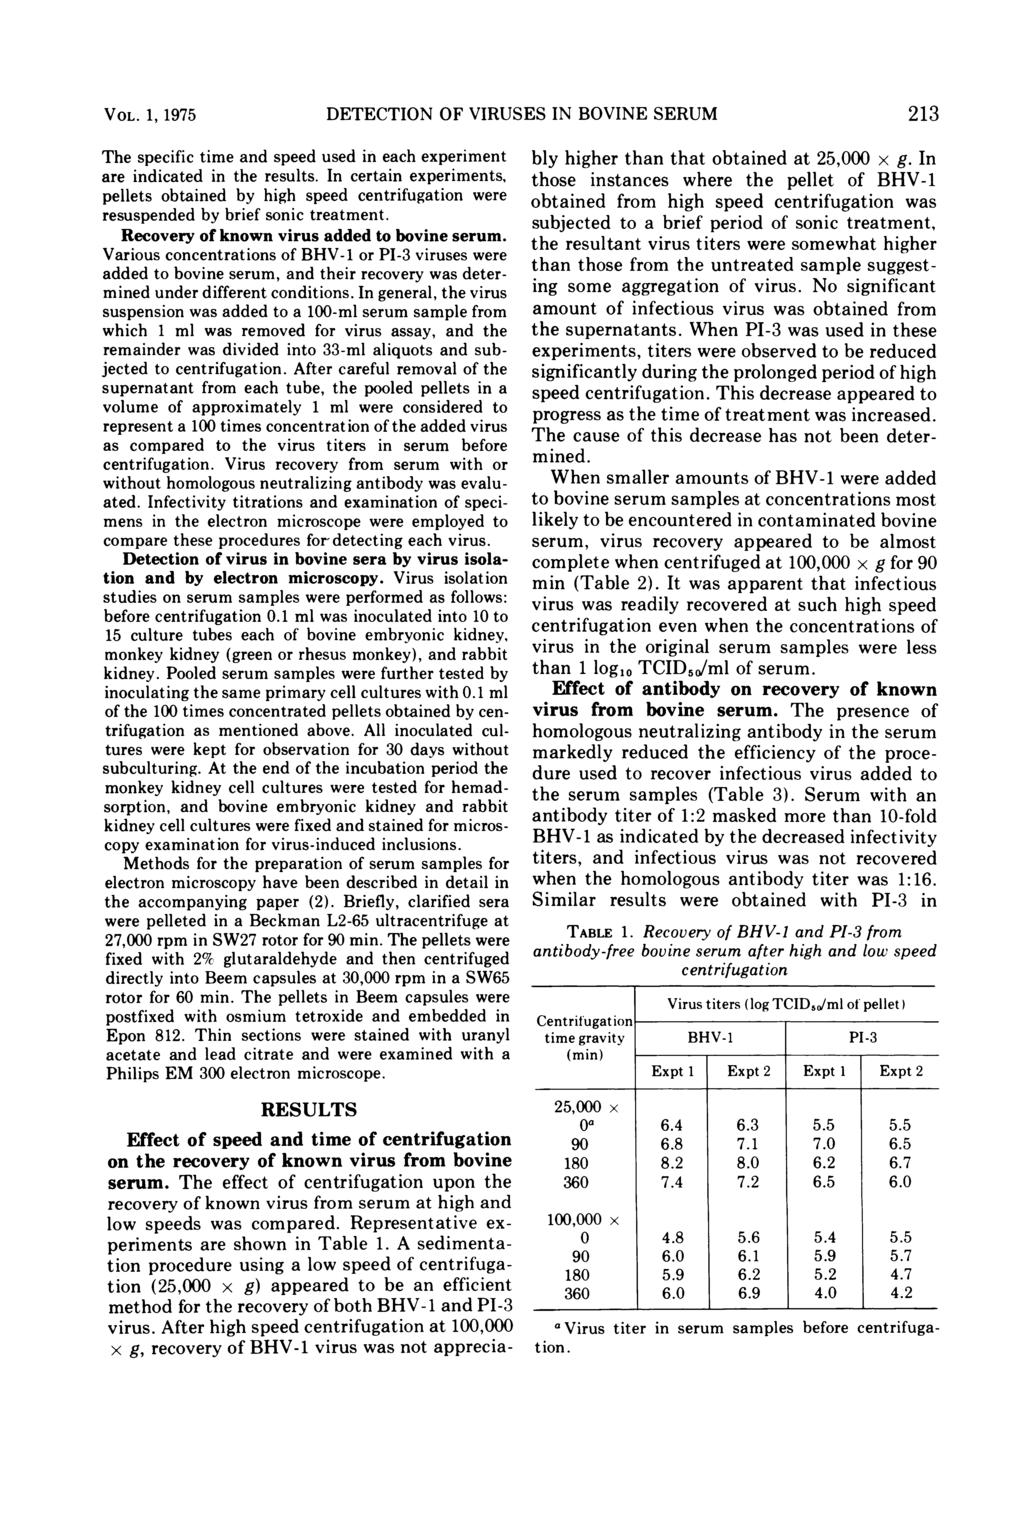 VOL. 1, 1975 DETECTION OF VIRUSES IN BOVINE SERUM 213 The specific time and speed used in each experiment are indicated in the results.